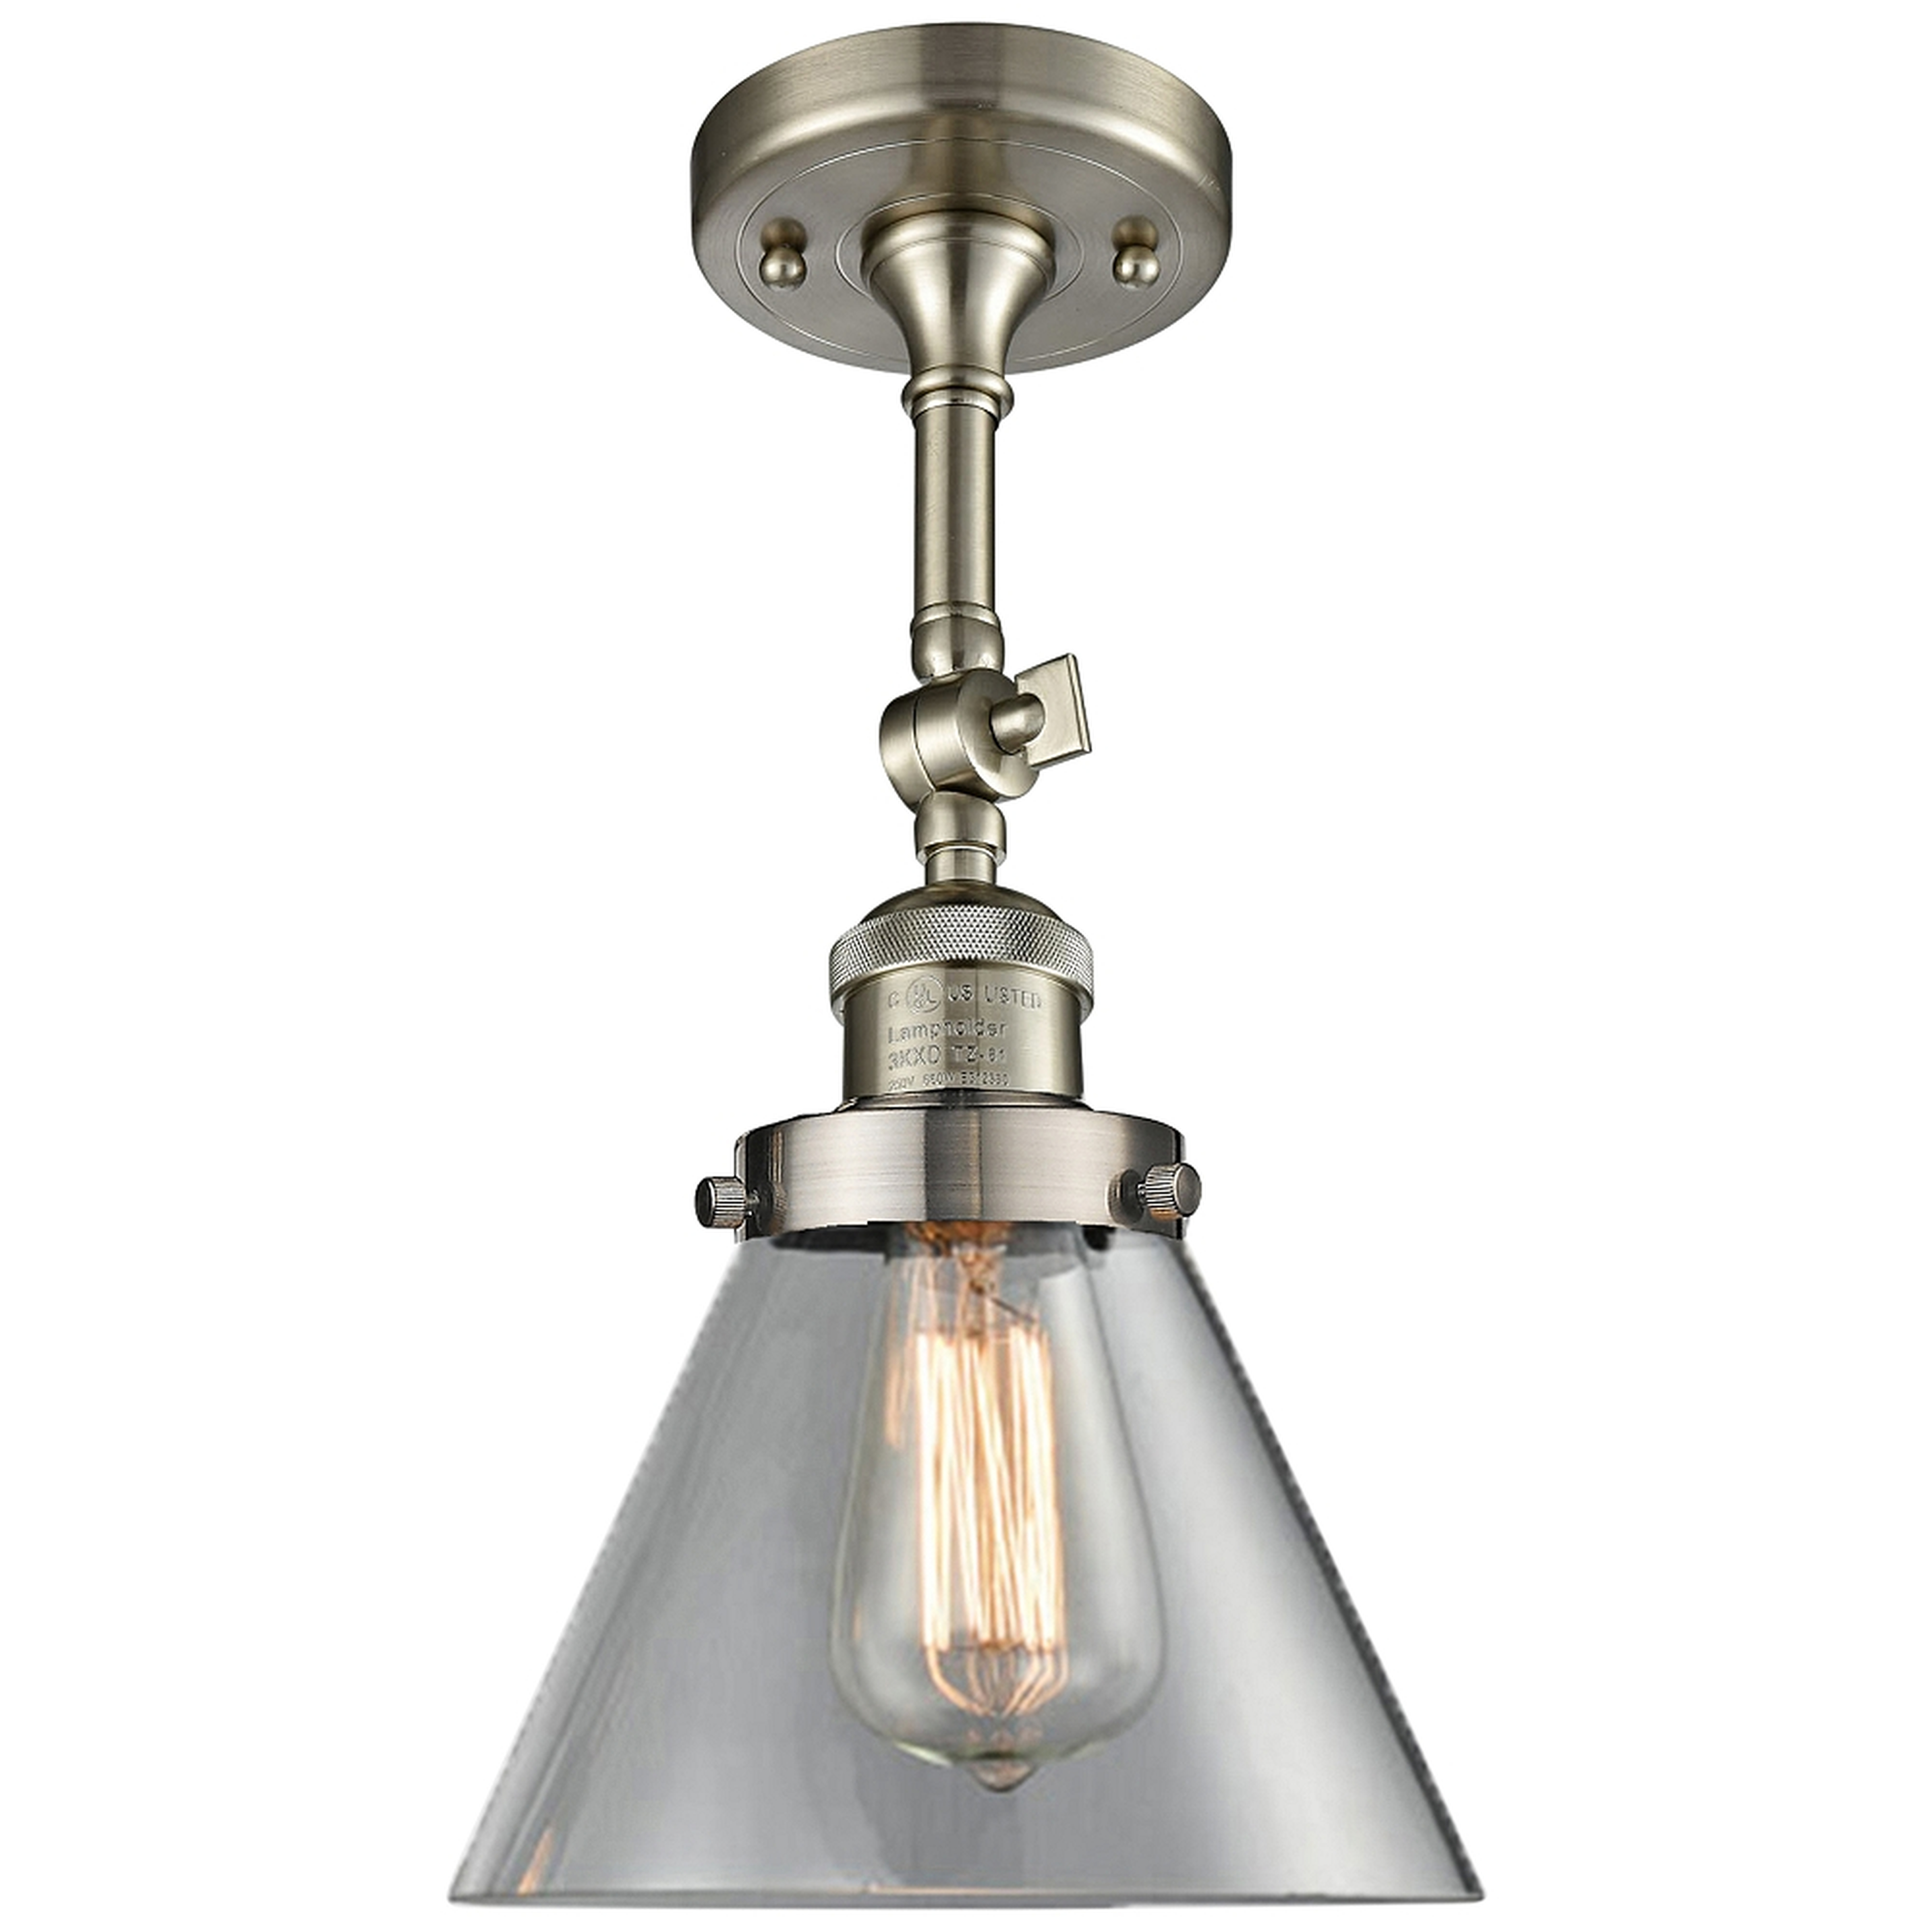 Large Cone 8"W Satin Brushed Nickel Adjustable Ceiling Light - Style # 40Y20 - Lamps Plus